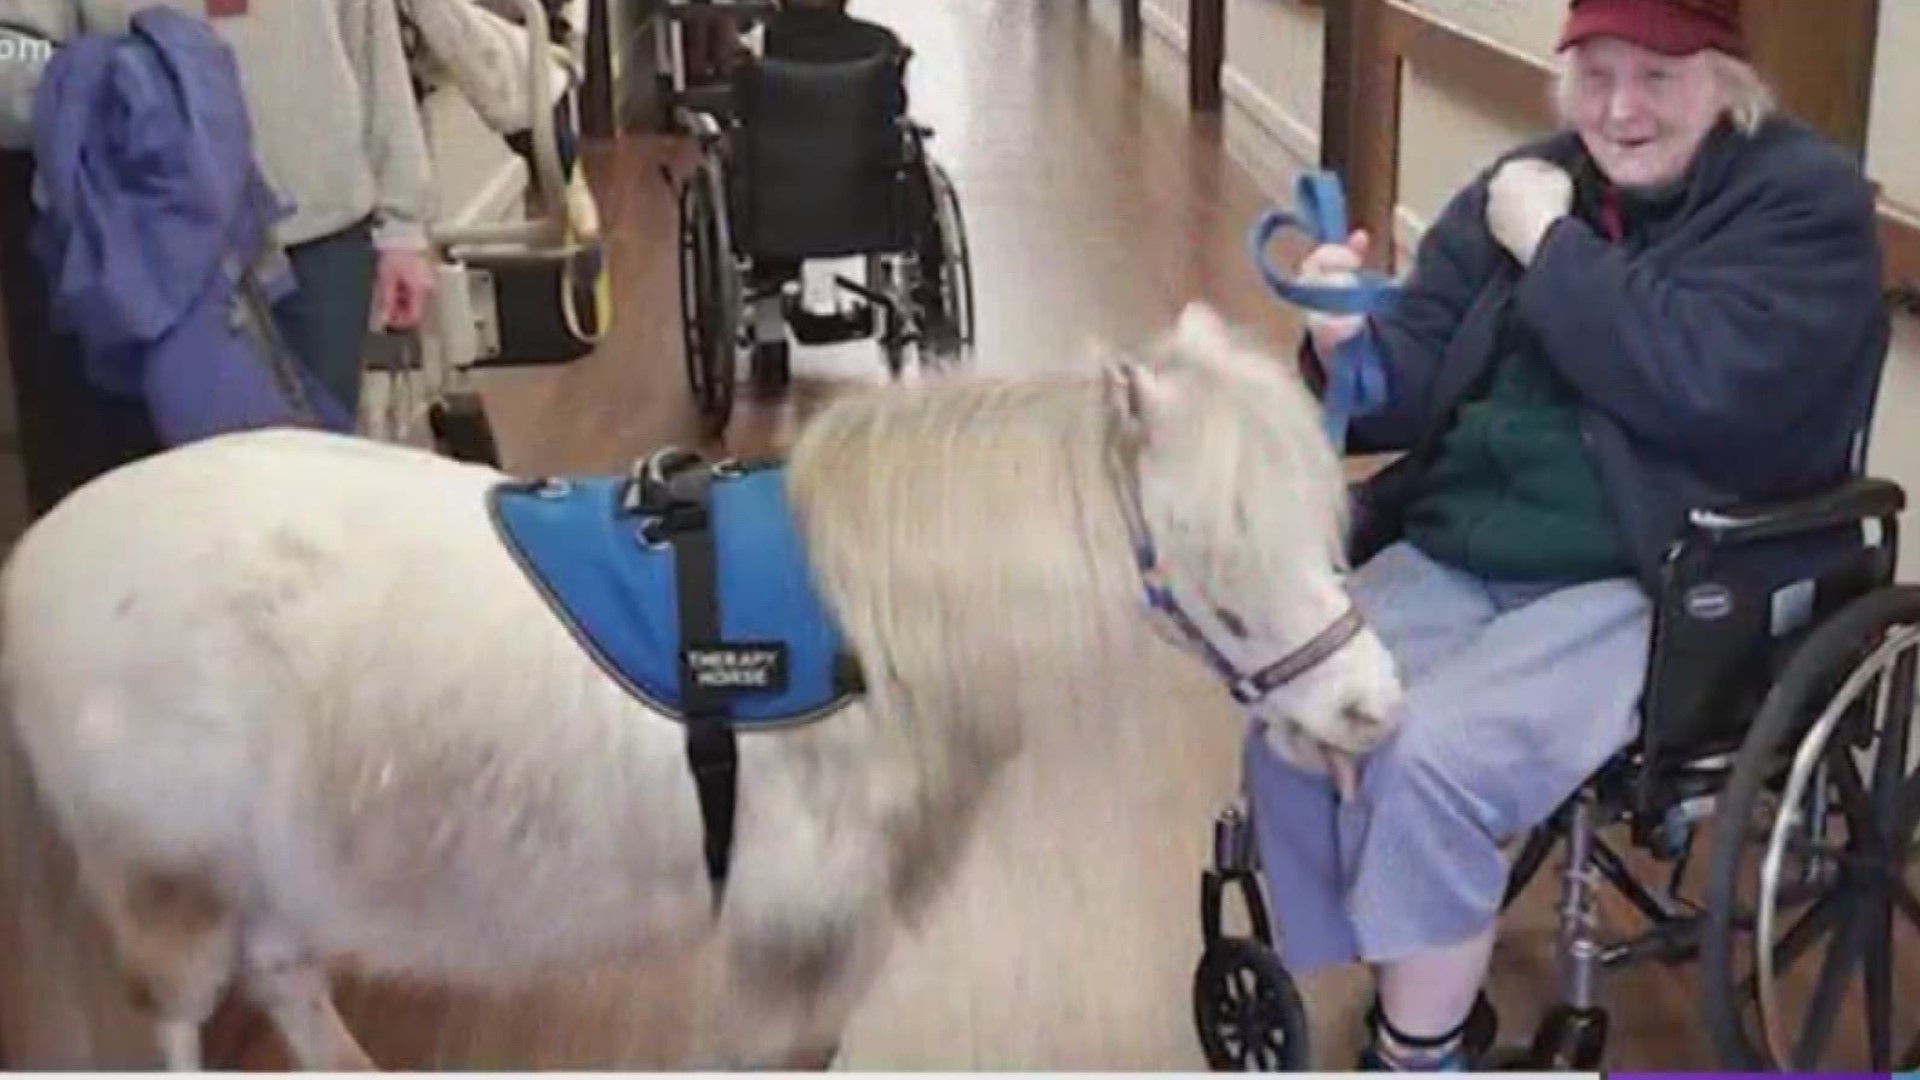 A local non-profit that brings therapy animals into nursing homes has been hit hard by coronavirus restrictions.